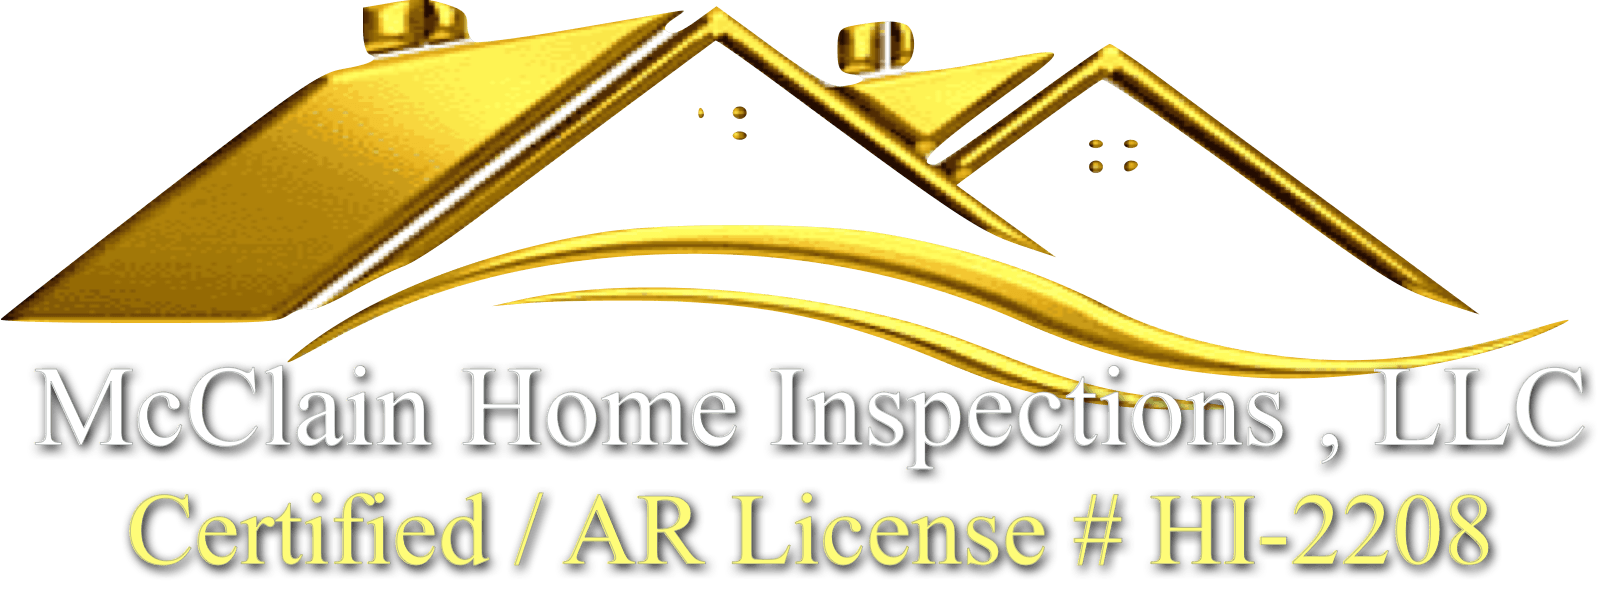 logo of mcclain home inspections